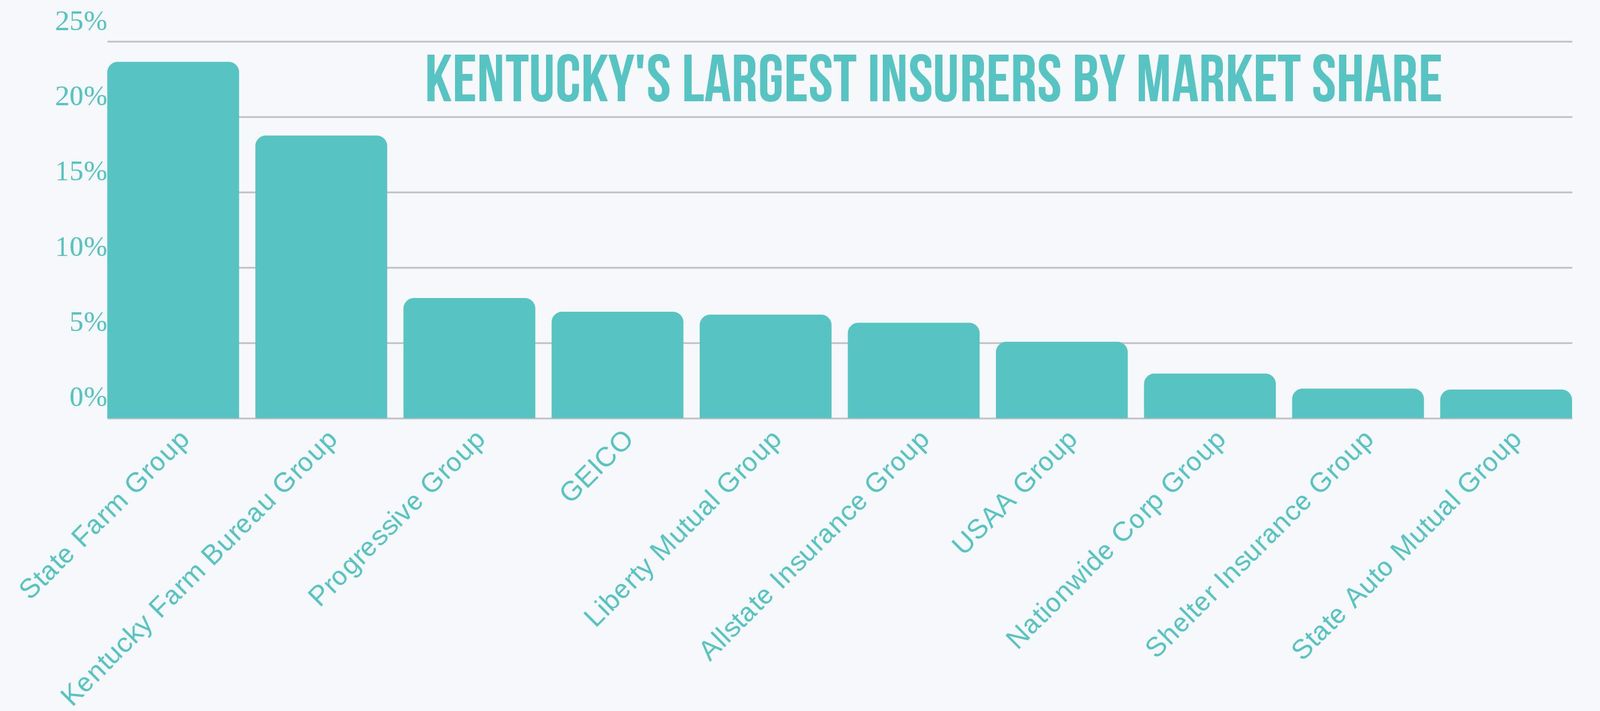 Largest car insurers in Kentucky by market share